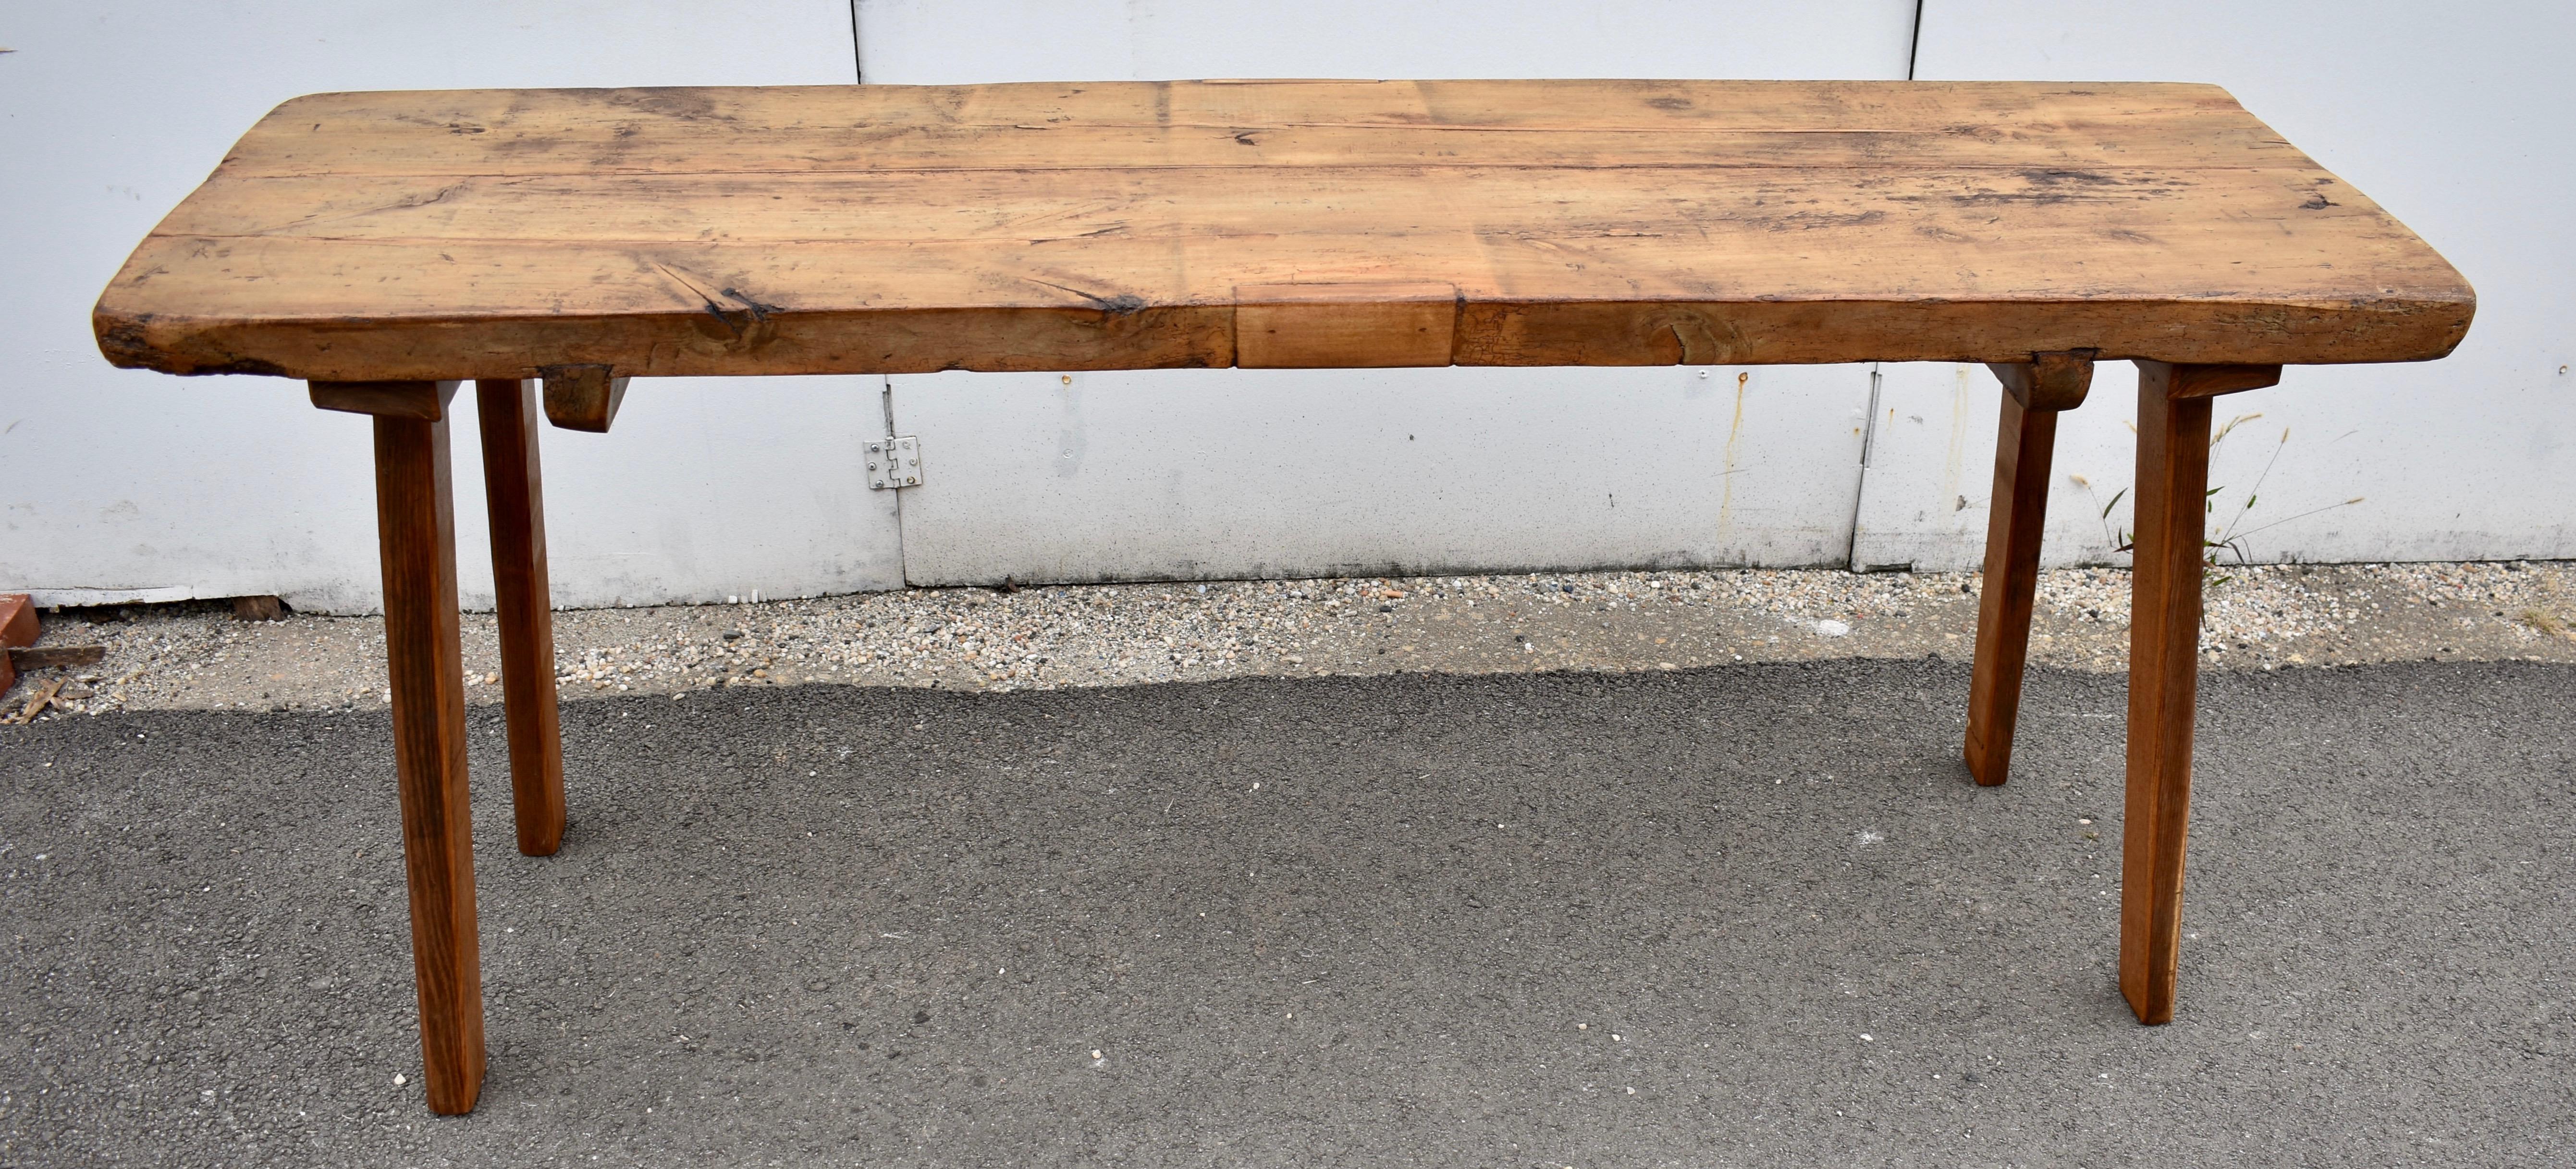 
The top of this large pig bench consists of two slabs of elm over 2” thick, spline- joined with two oak braces dovetailed into the underside as additional reinforcement.  At one end an iron staple is driven into the end grain.  At the other end an